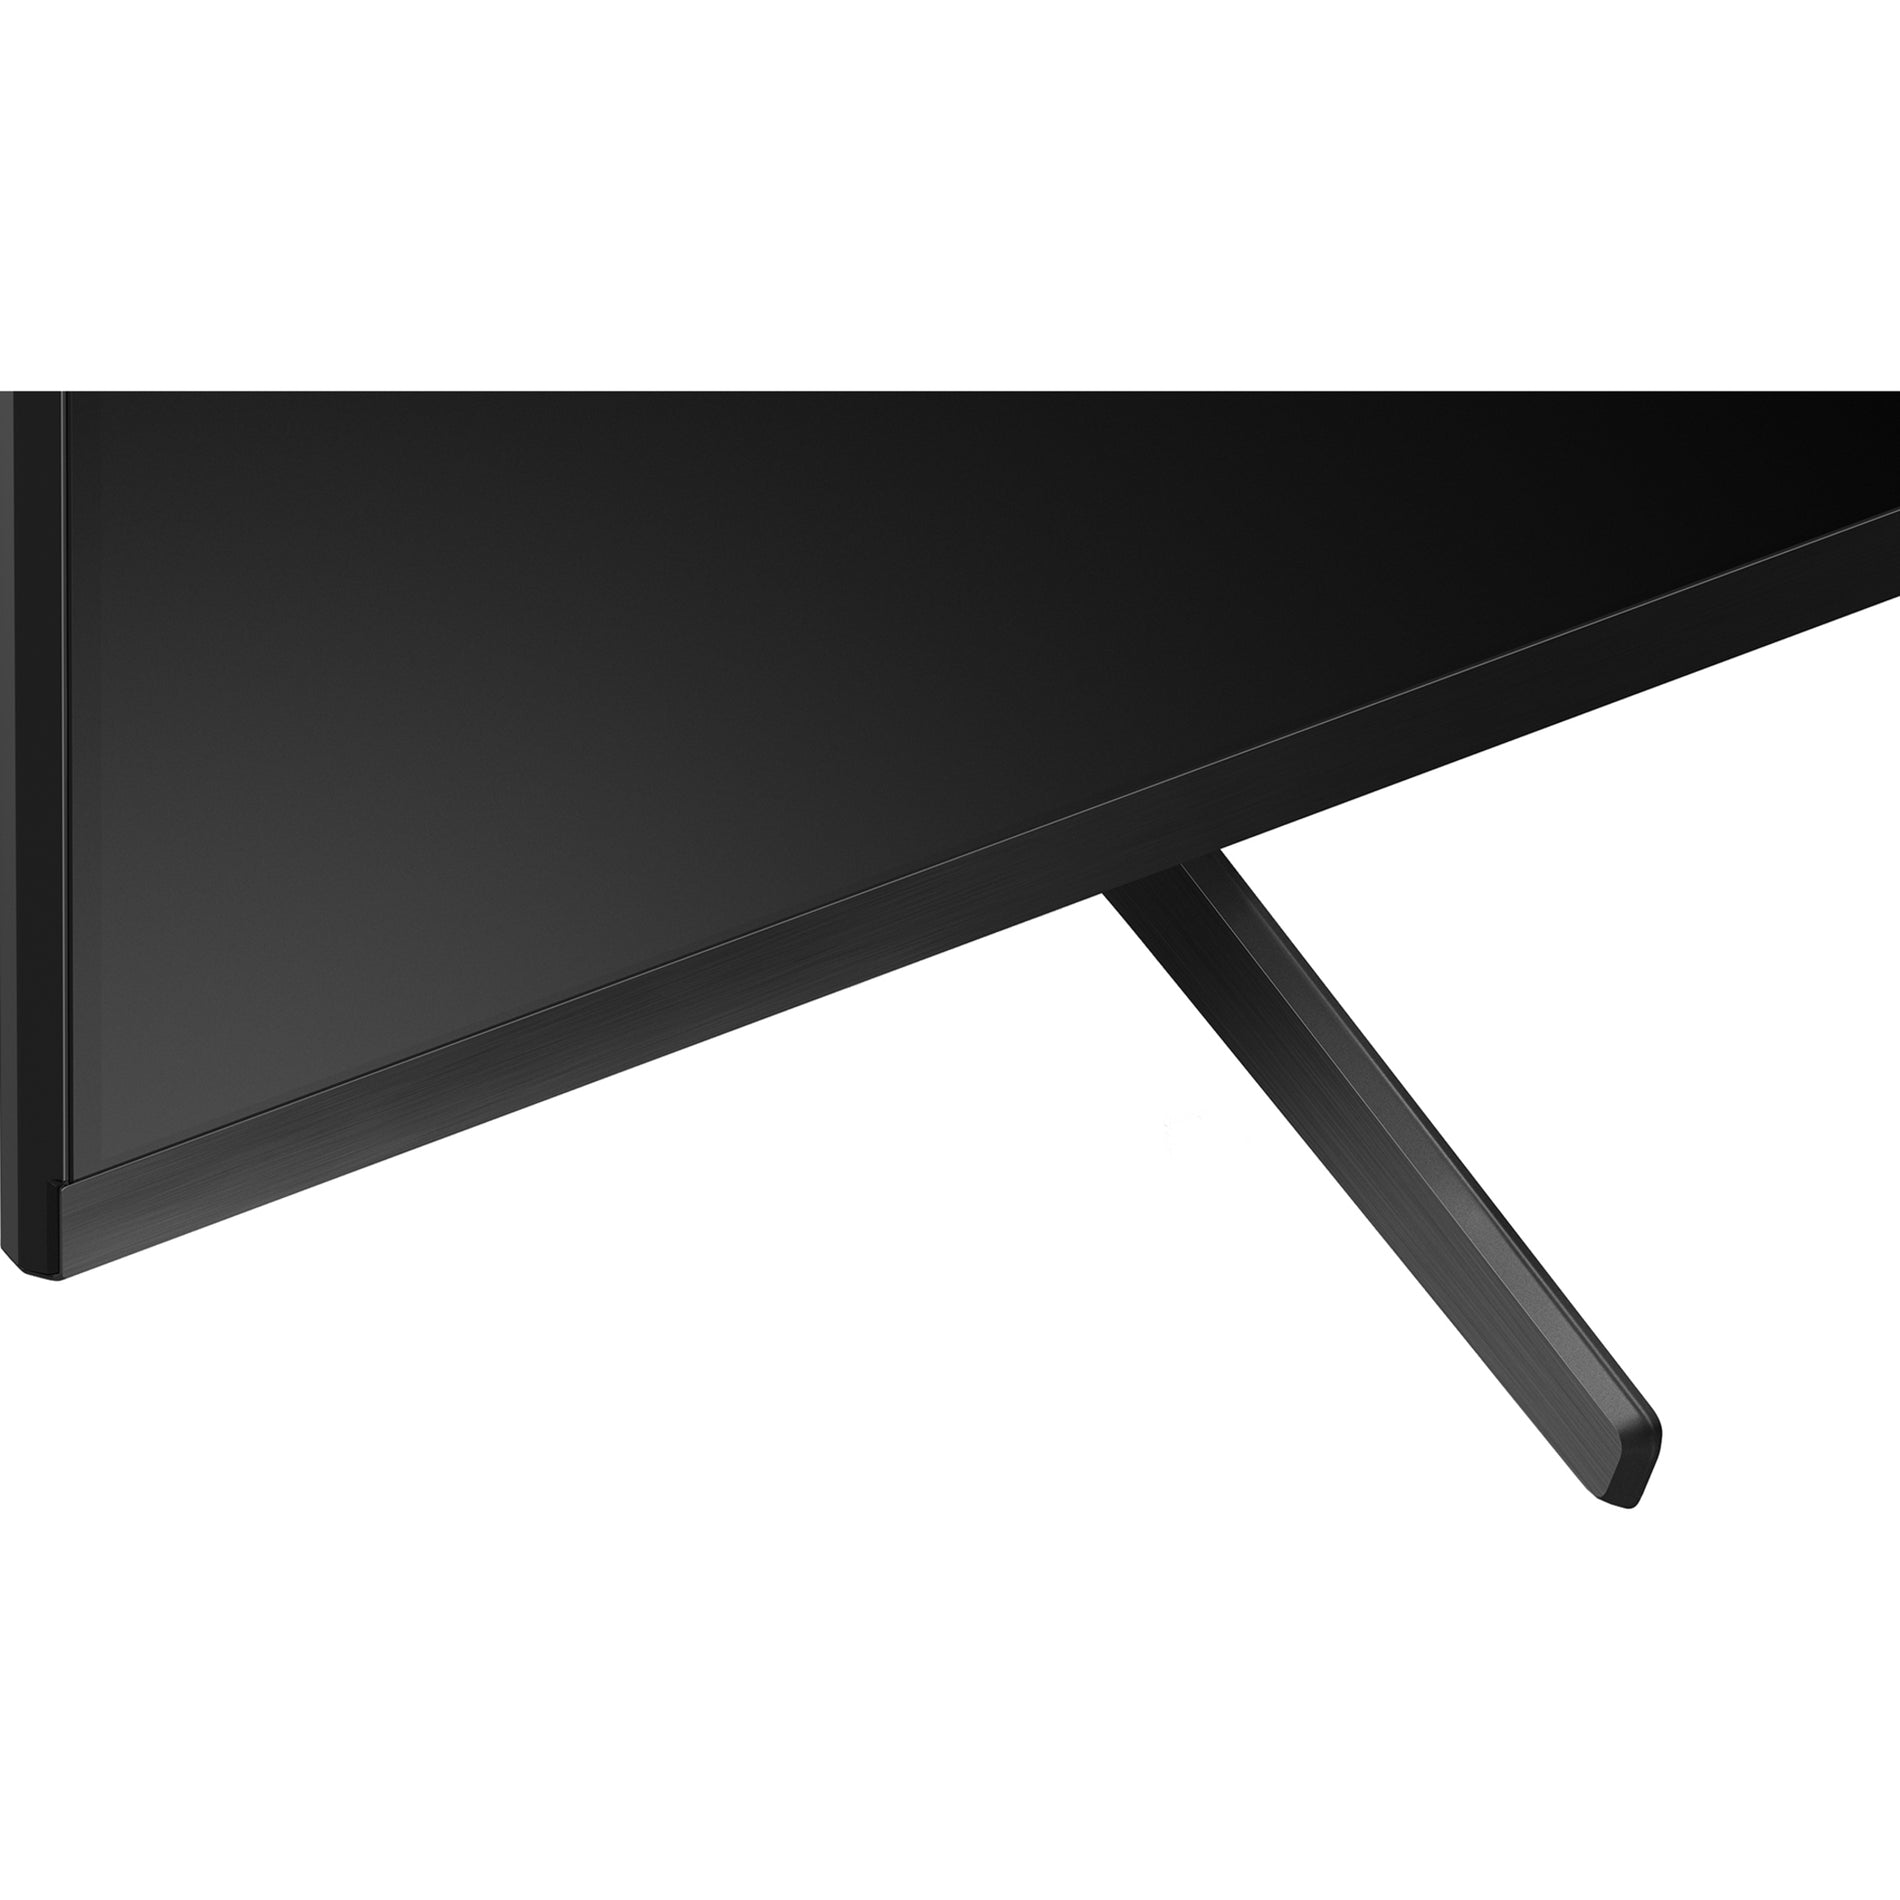 Sony Pro FW43BZ35J 43" BRAVIA 4K HDR Professional Display, Android, 3 Year Warranty, Energy Star